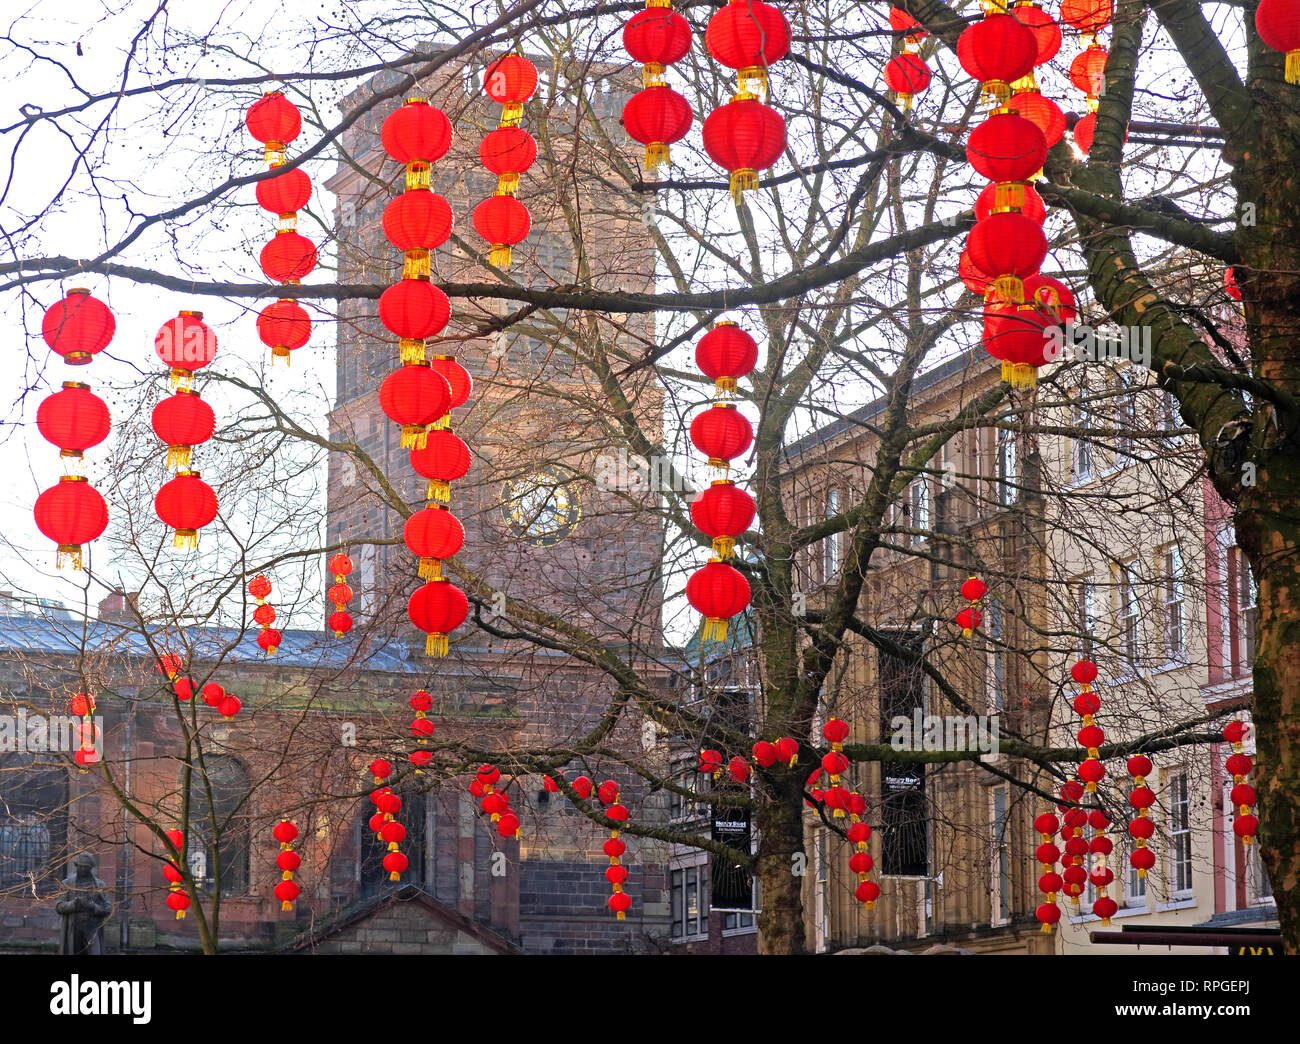 Red Lanterns in St Anns Square Manchester, Chinese New Year, Chinatown, North West England, UK, M2 7PW Stock Photo